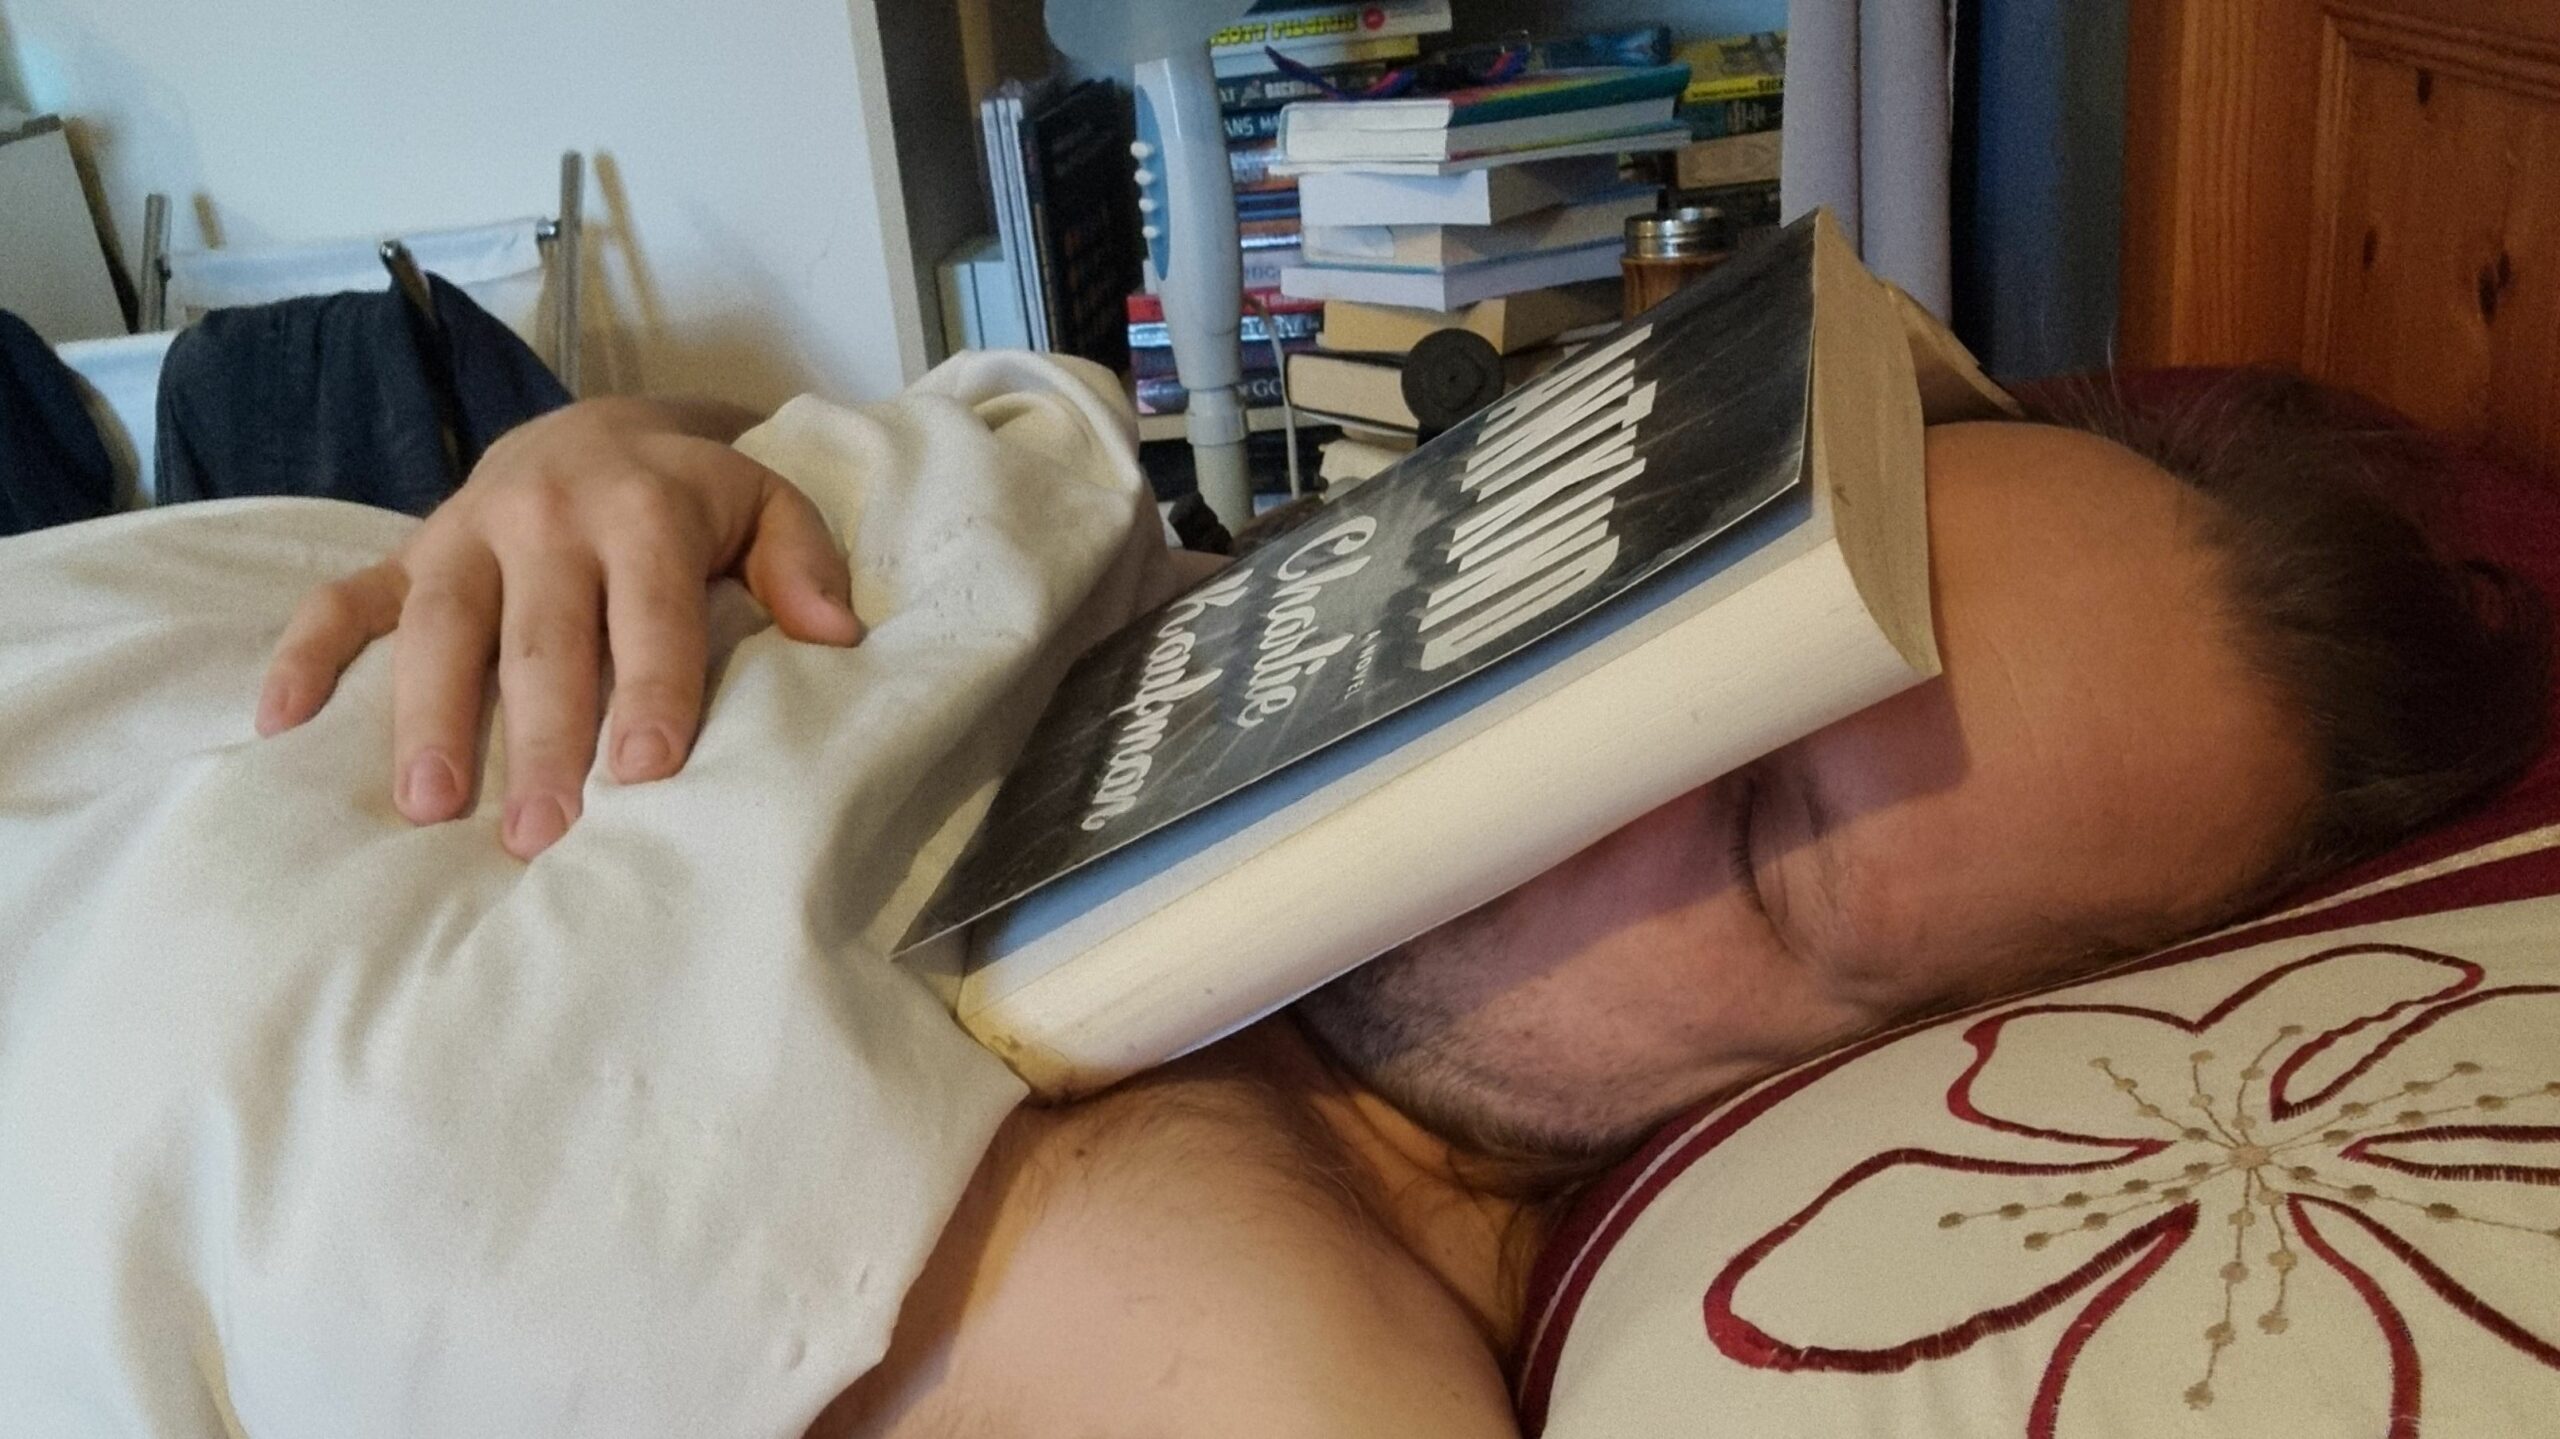 Photograph of Dan in bed, seemingly asleep with an open copy of Antkind on his face.